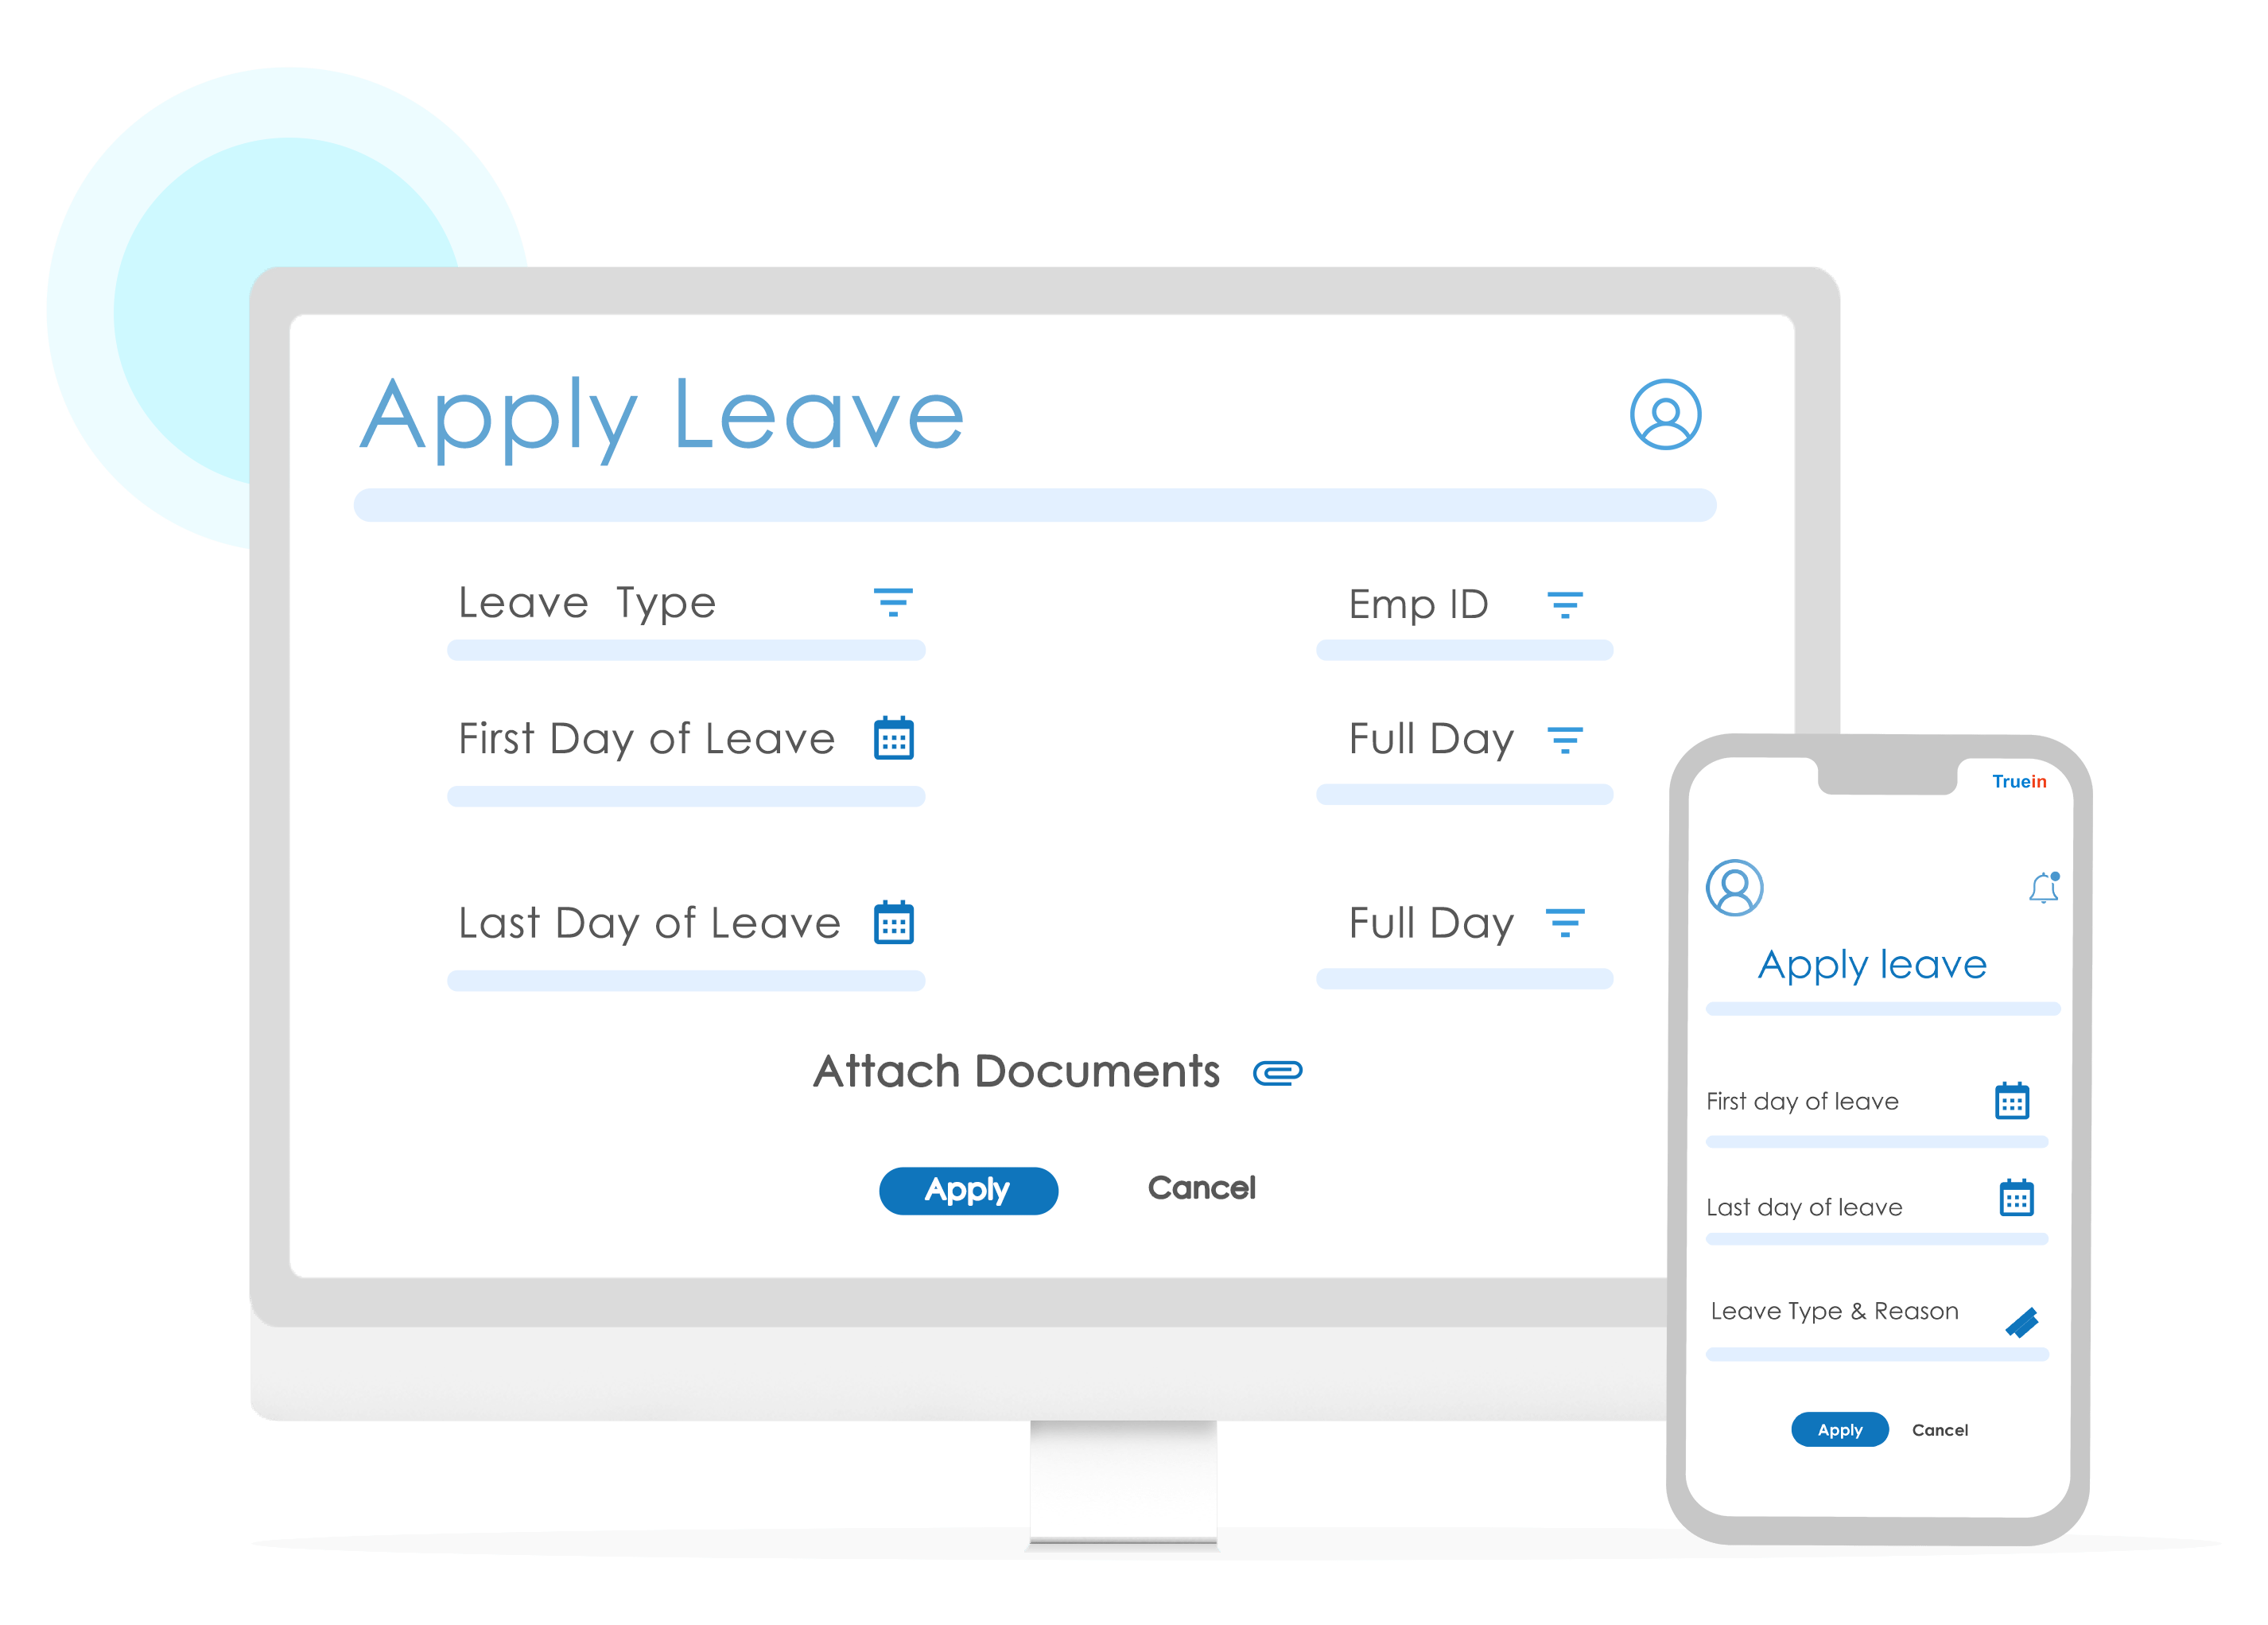 Apply for leave using Truein dashboard